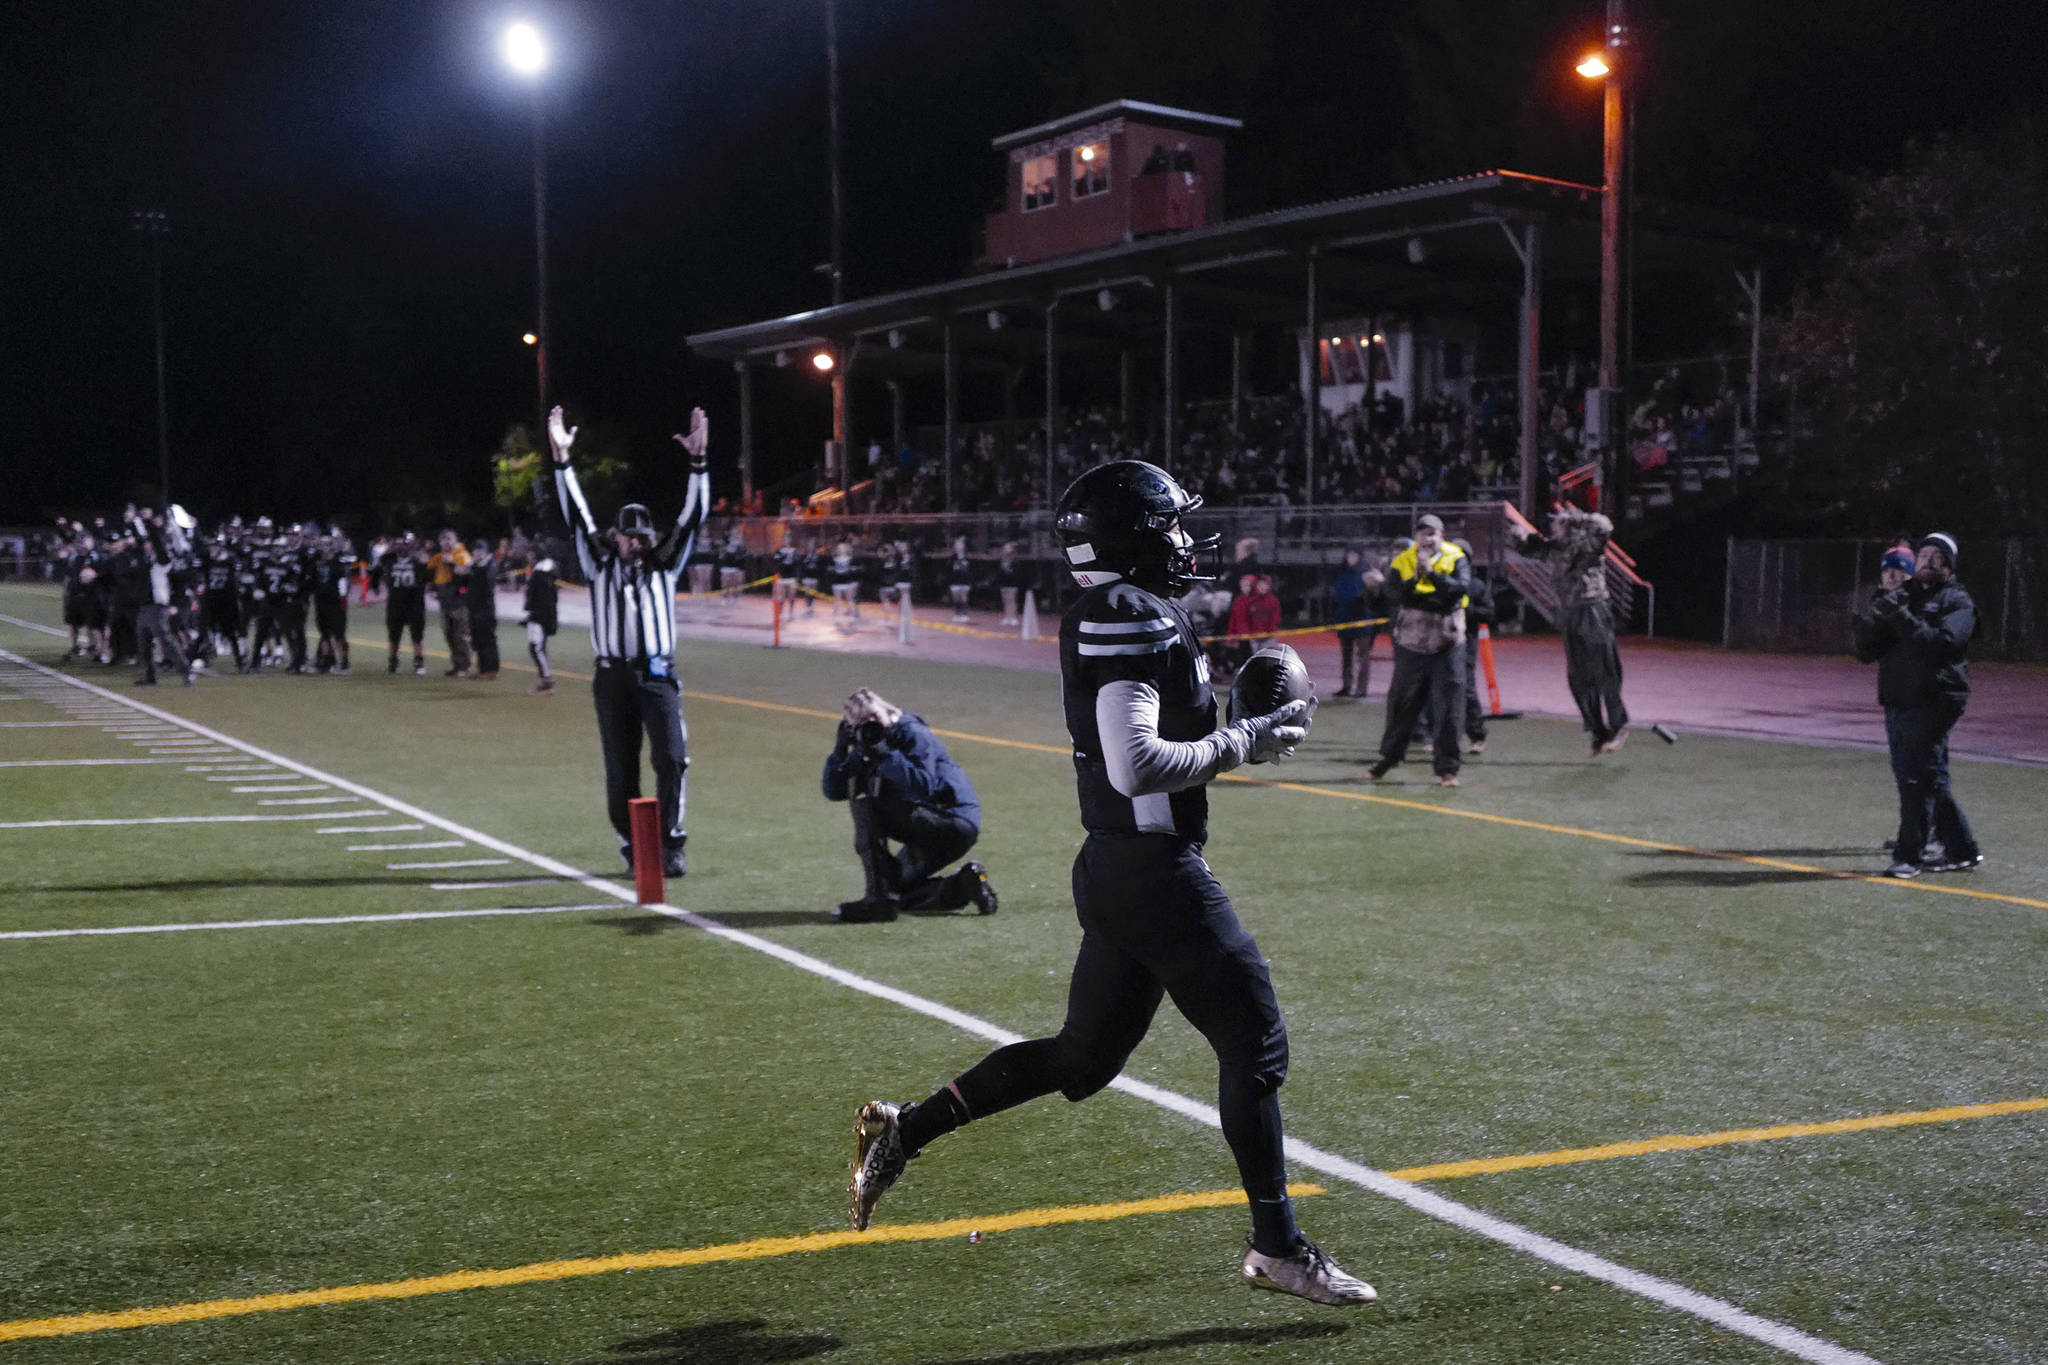 Juneau’s Ali Beya catches a Cooper Kriegmont pass in the endzone for Juneau’s second touchdown against South Anchorage at Adair-Kennedy Memorial Field on Saturday, Oct. 12, 2019. South Anchorage won 54-14. (Michael Penn | Juneau Empire)